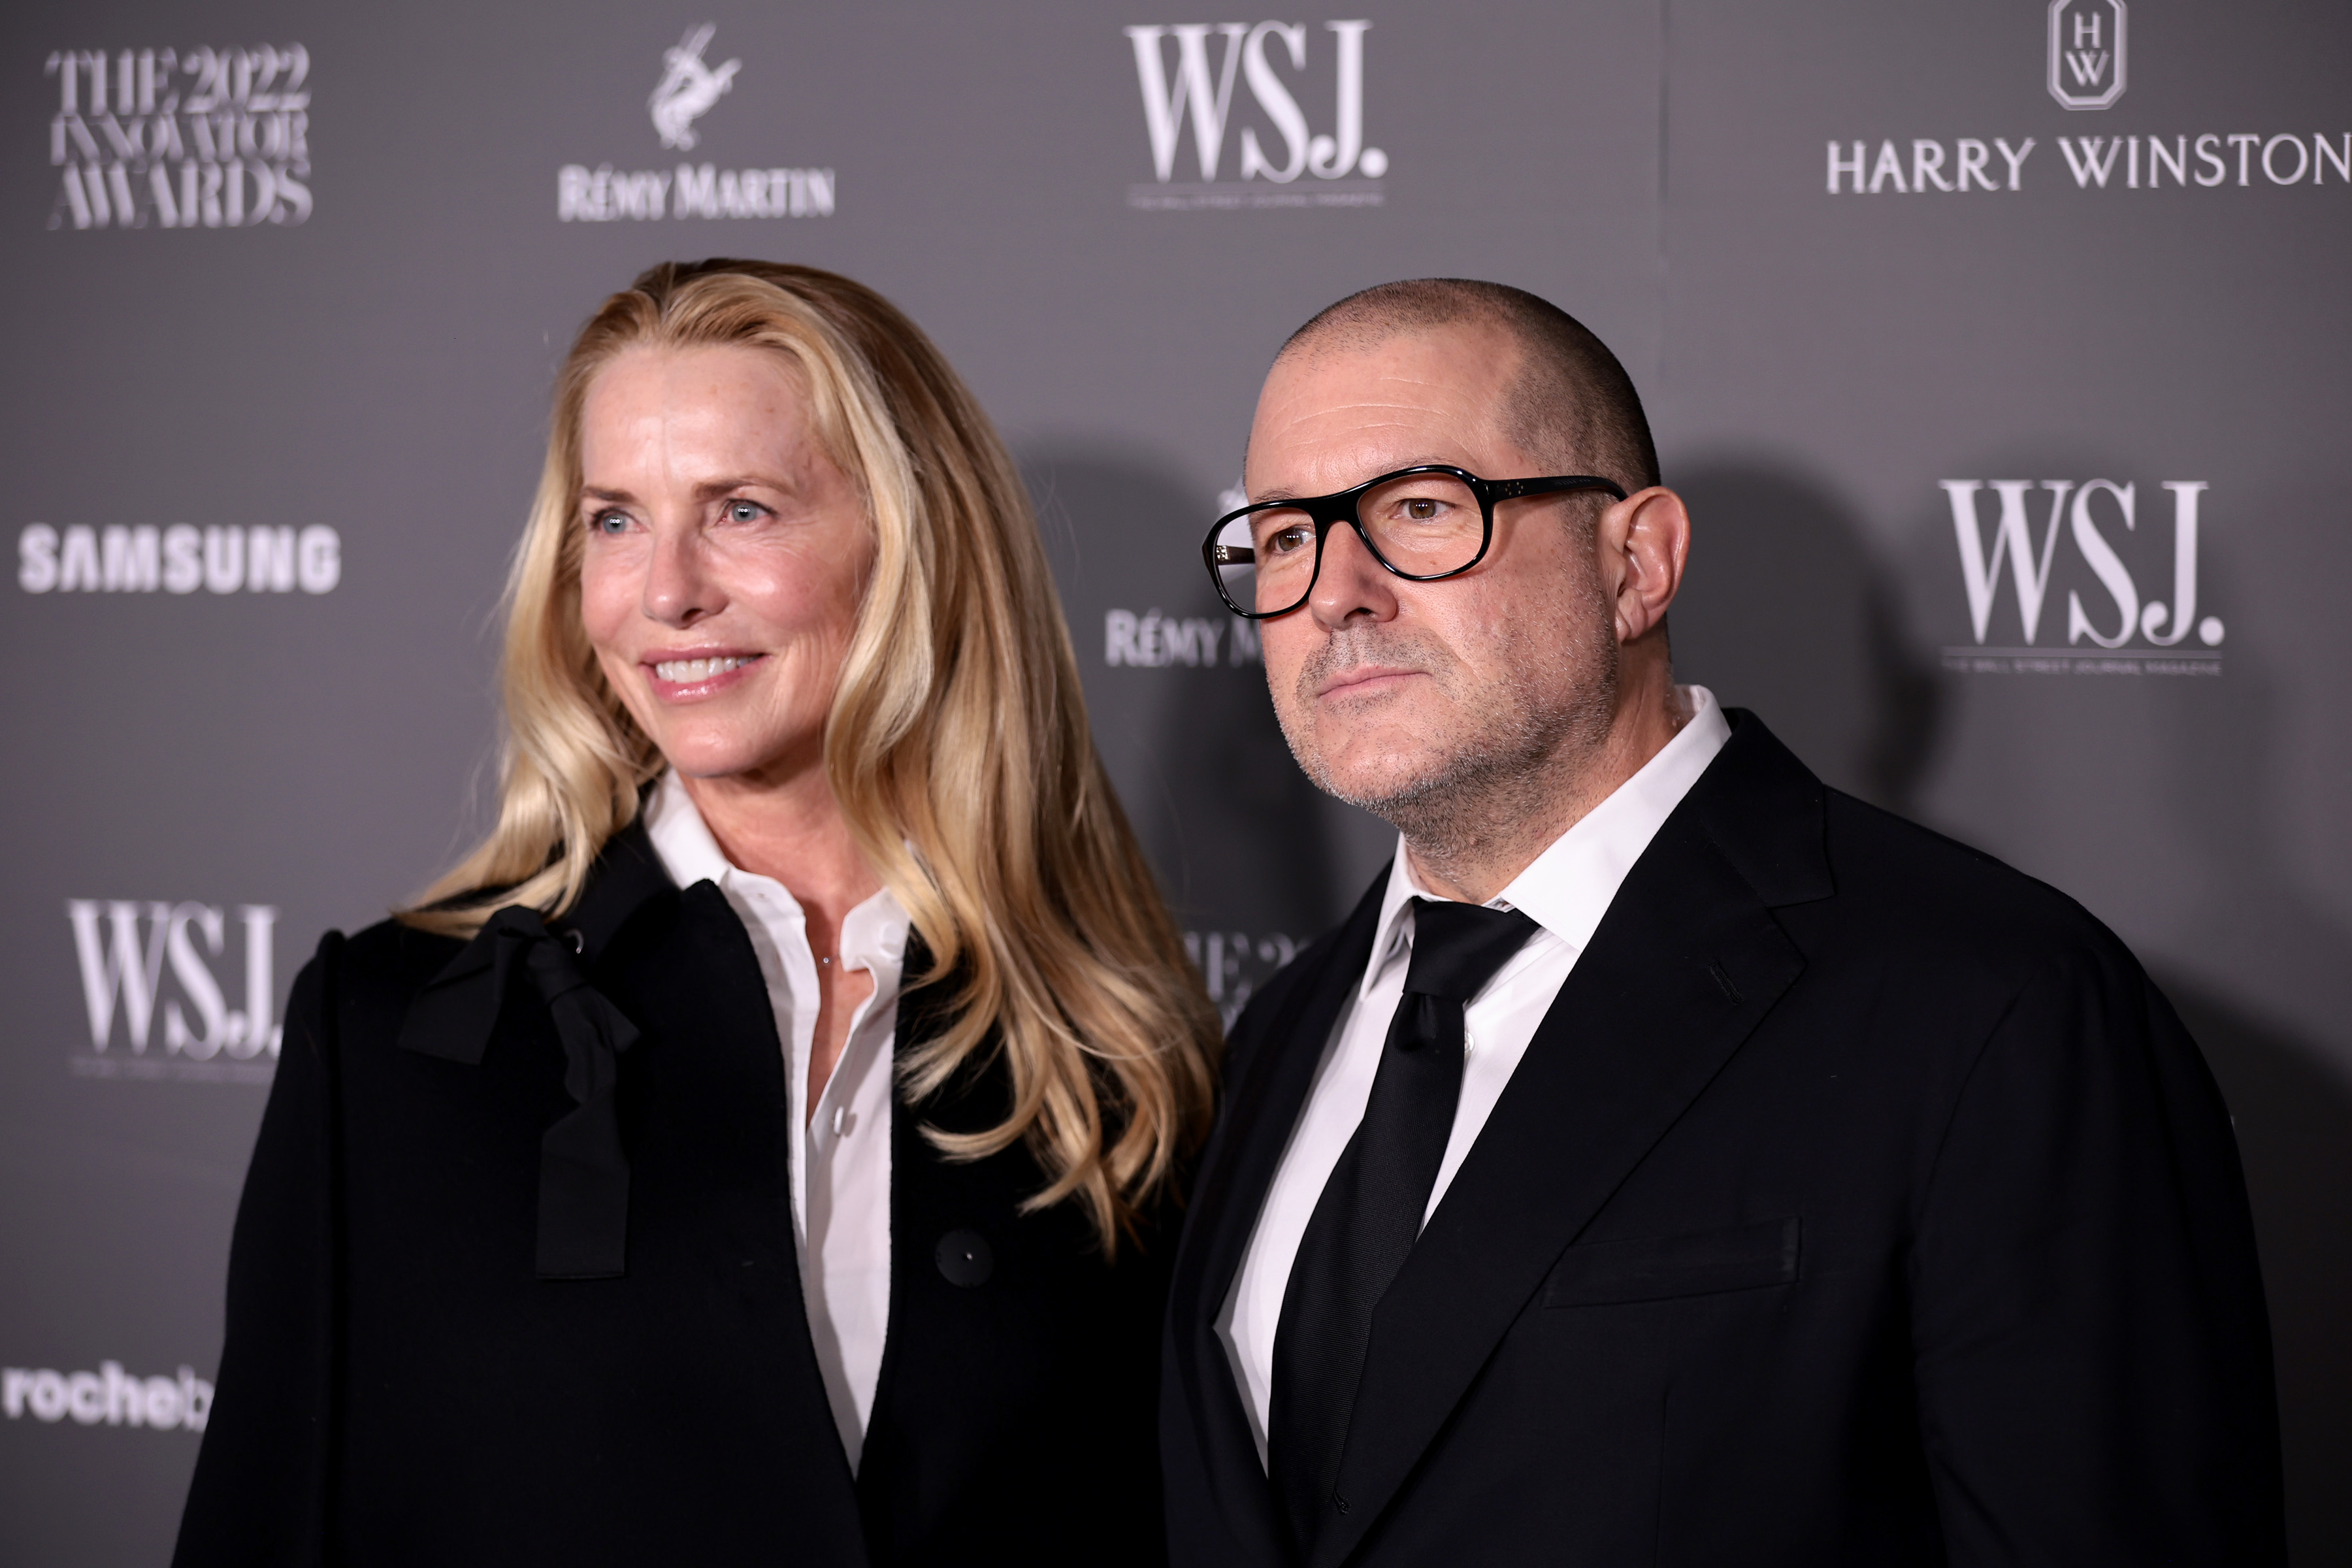 A man and woman in formal wear pose at a WSJ event, the woman slightly blurred.